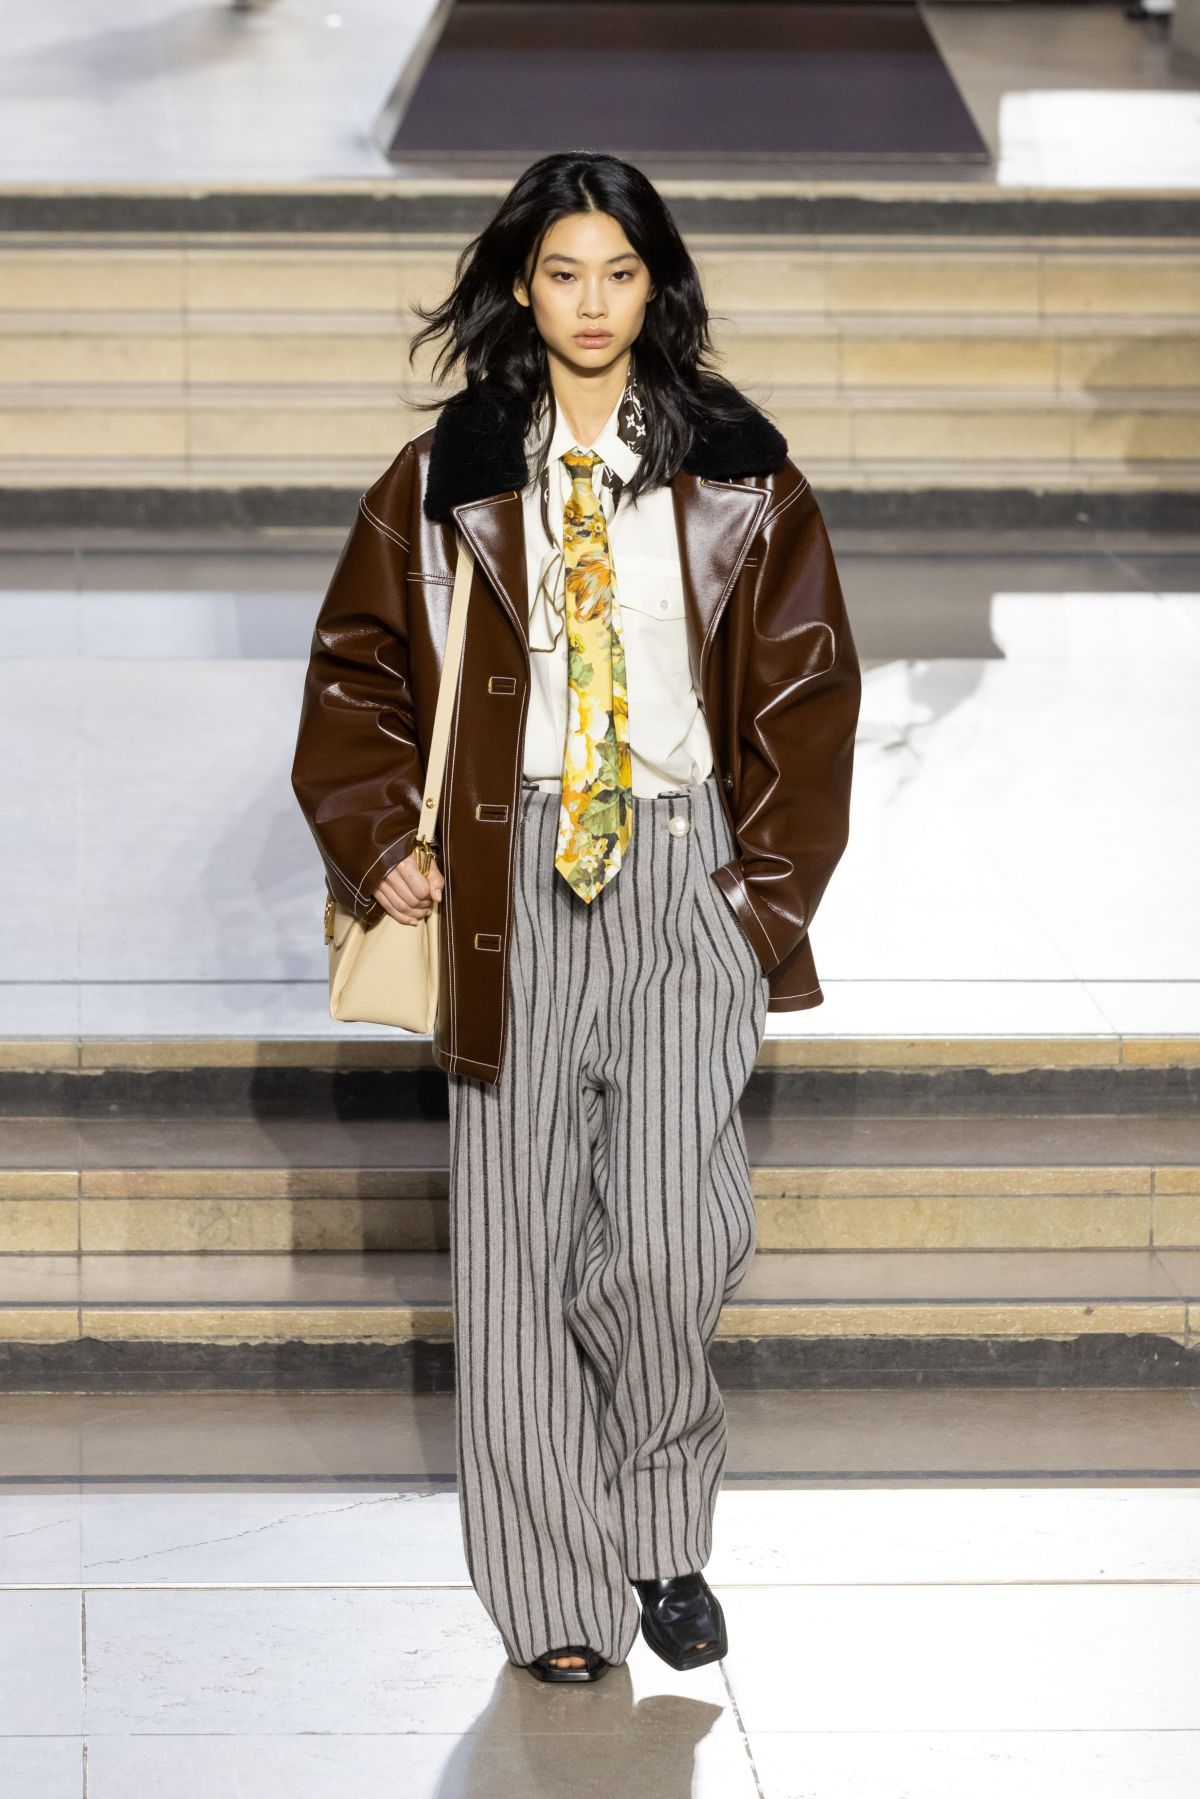 ⌘ on X: Hoyeon Jung's runway debut was at Louis Vuitton 2016 RTW